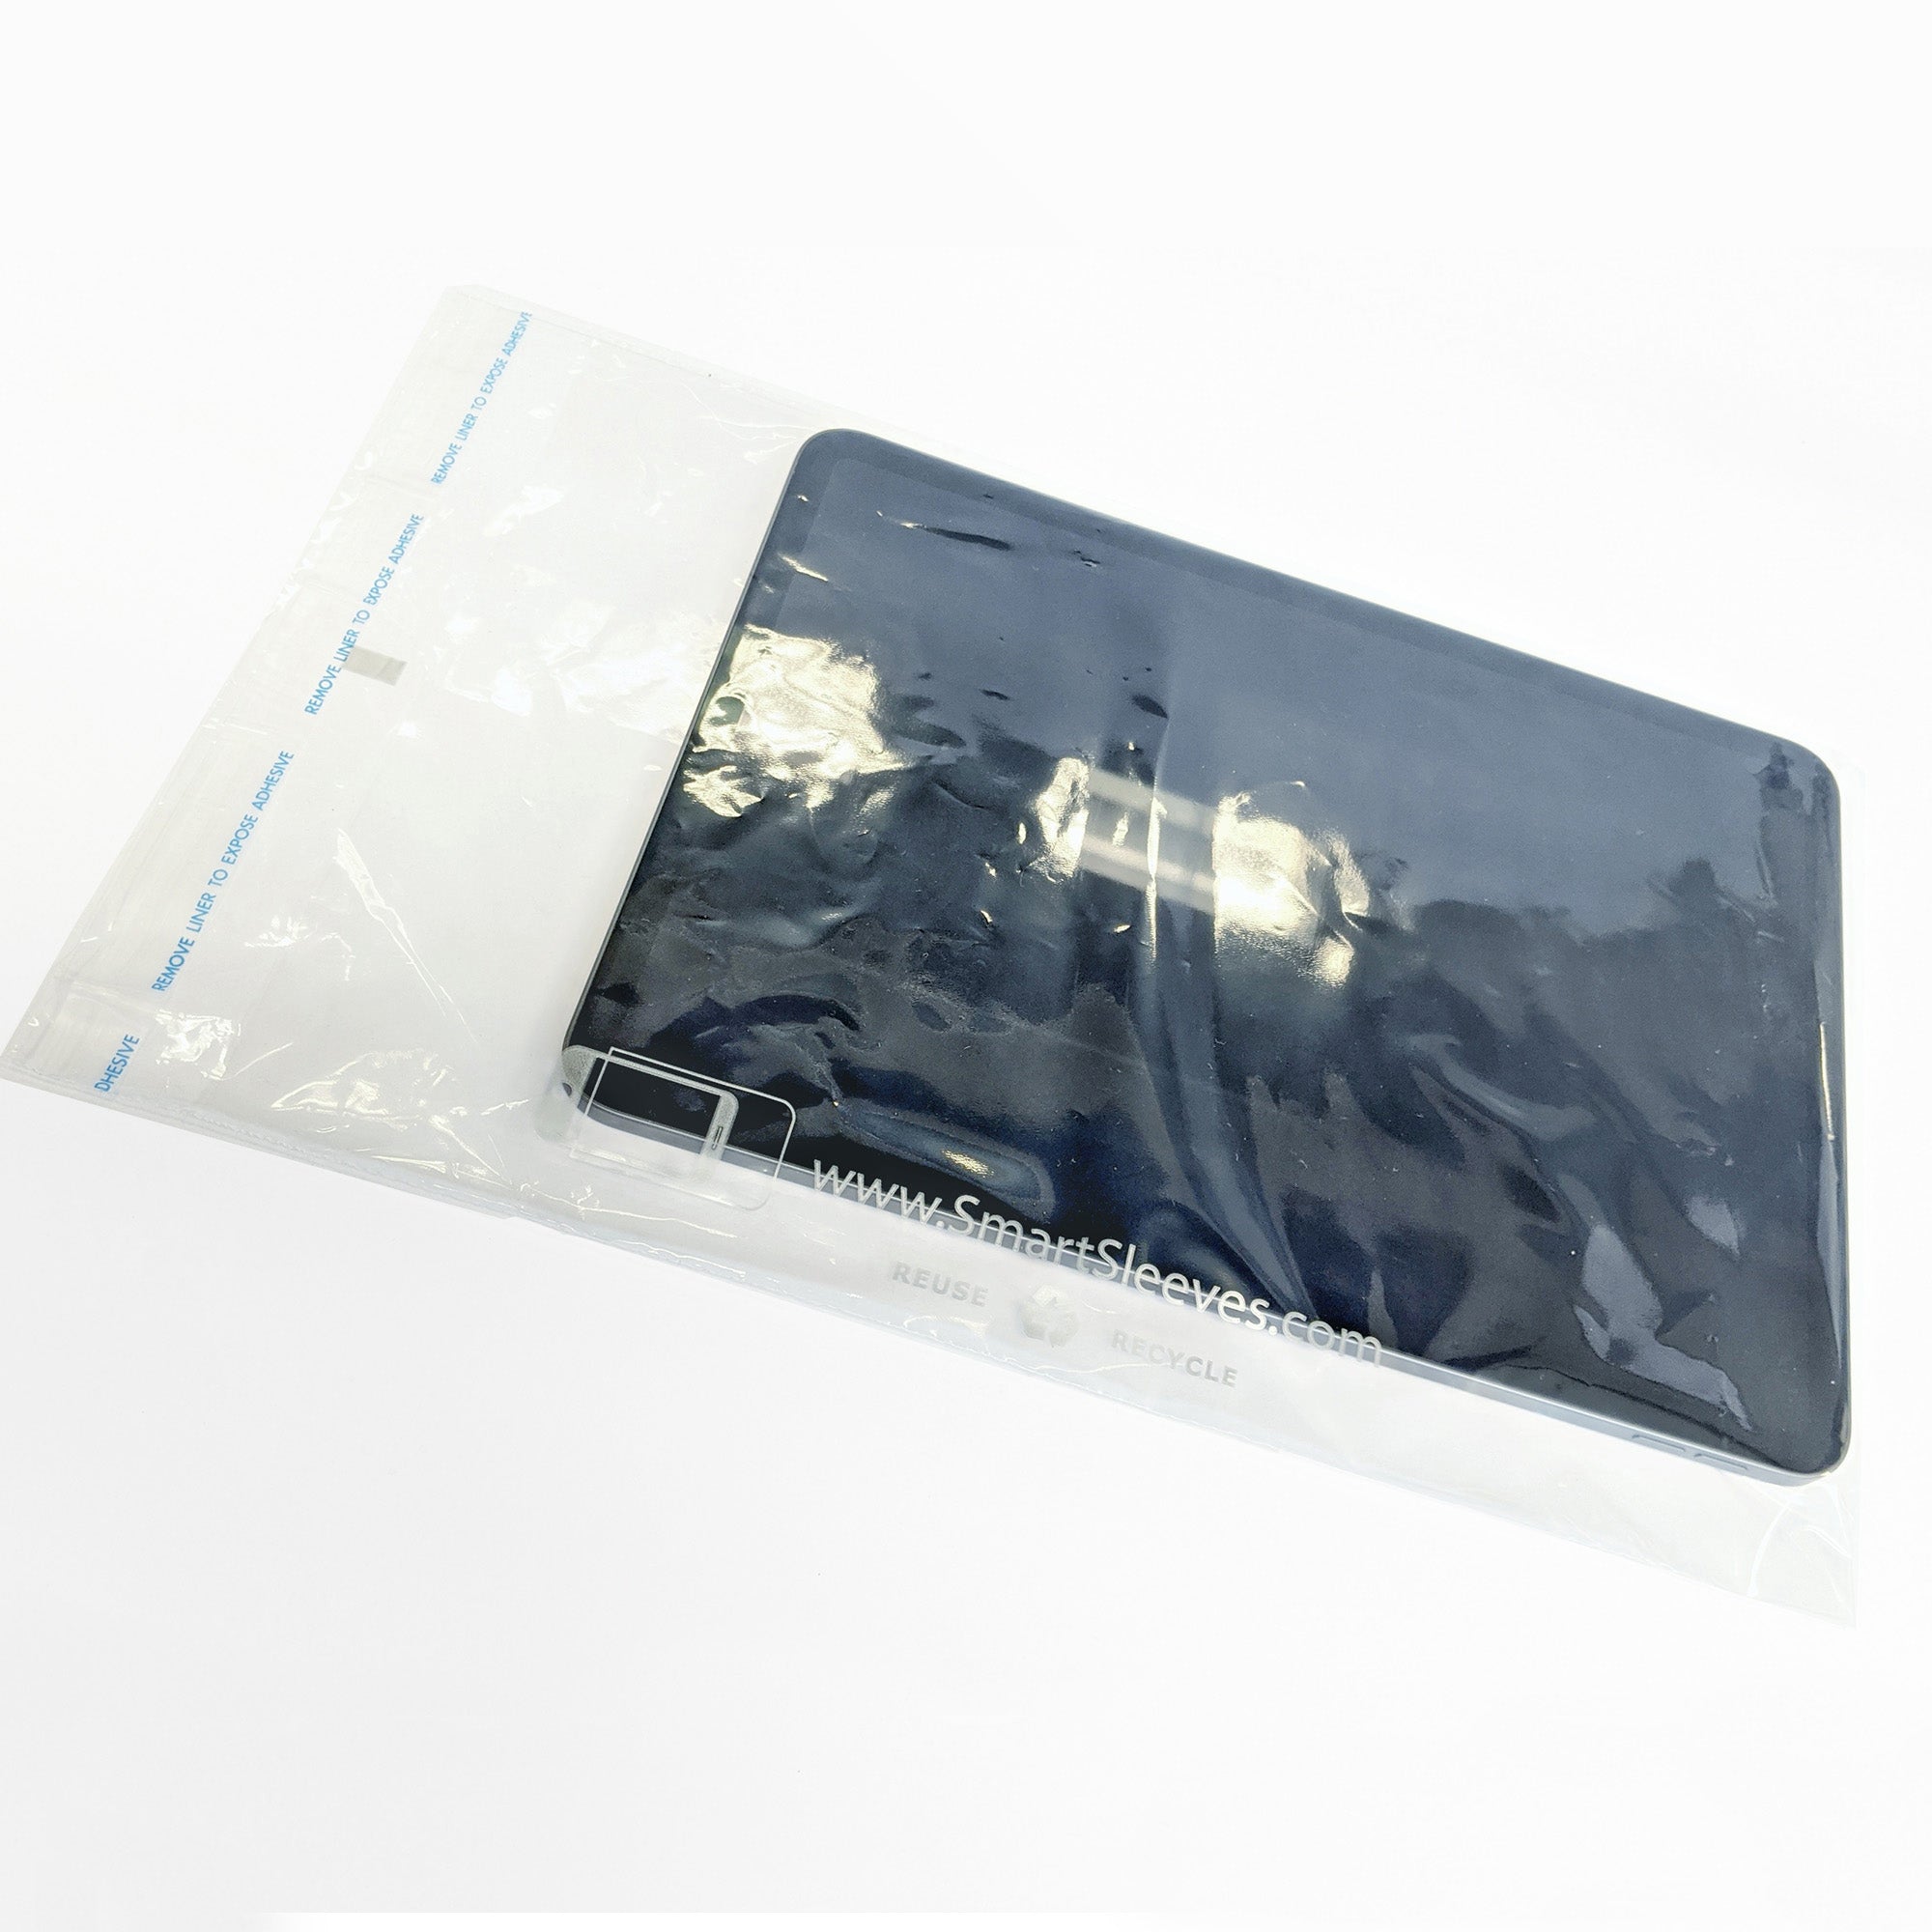 ClearBags Antimicrobial SmartSleeves for Tablets - Large (250pcs) - 15-07387